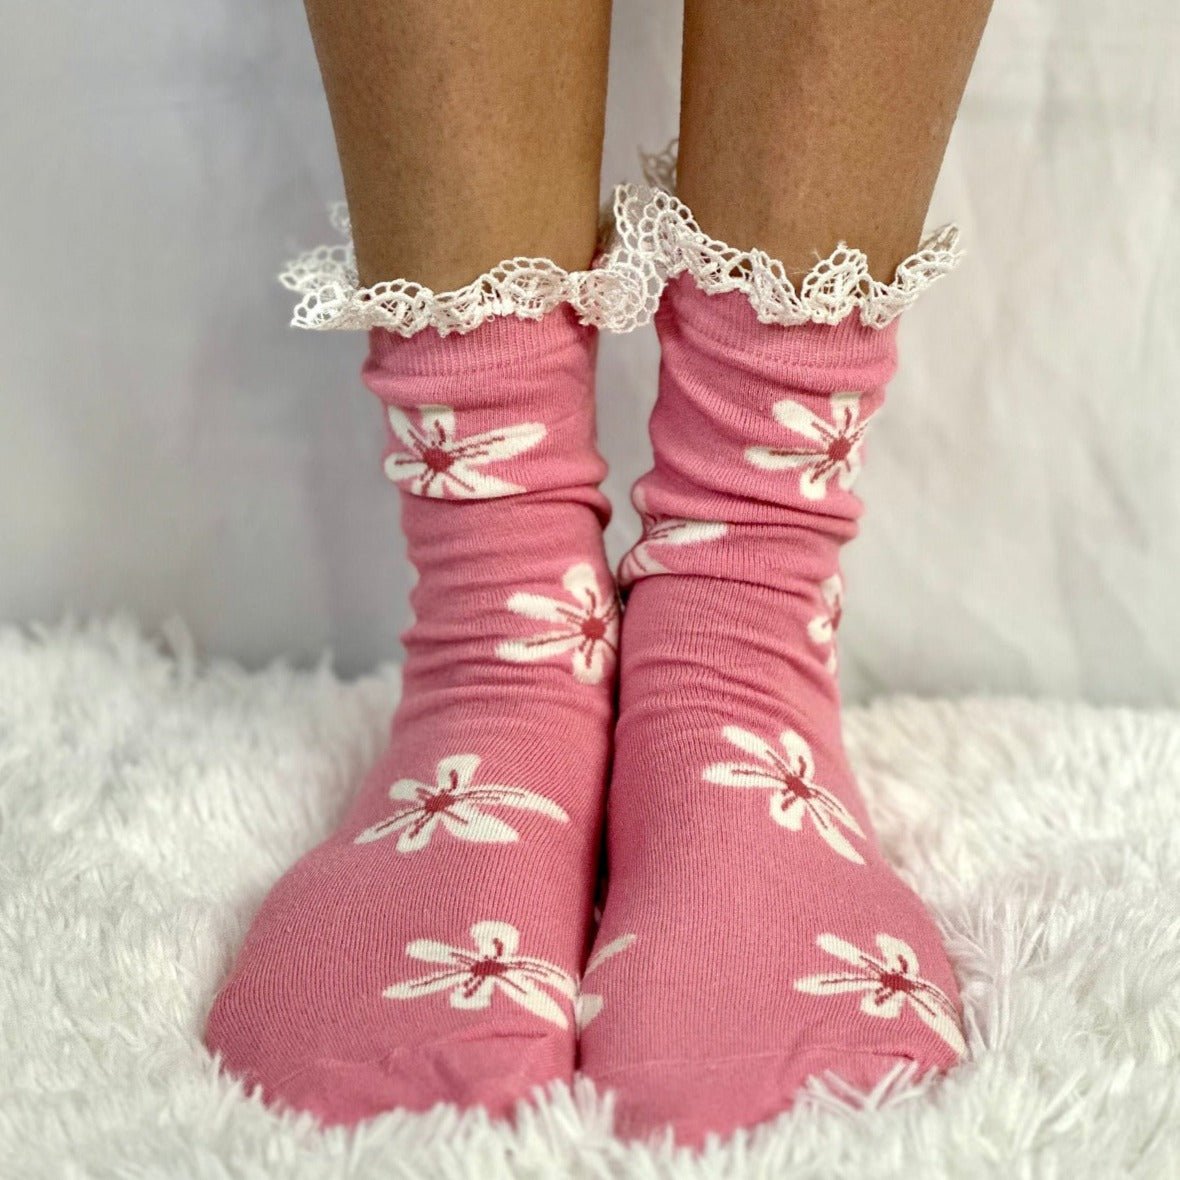 POSEY lace top ankle sock - pink', fashion crew ankle socks women